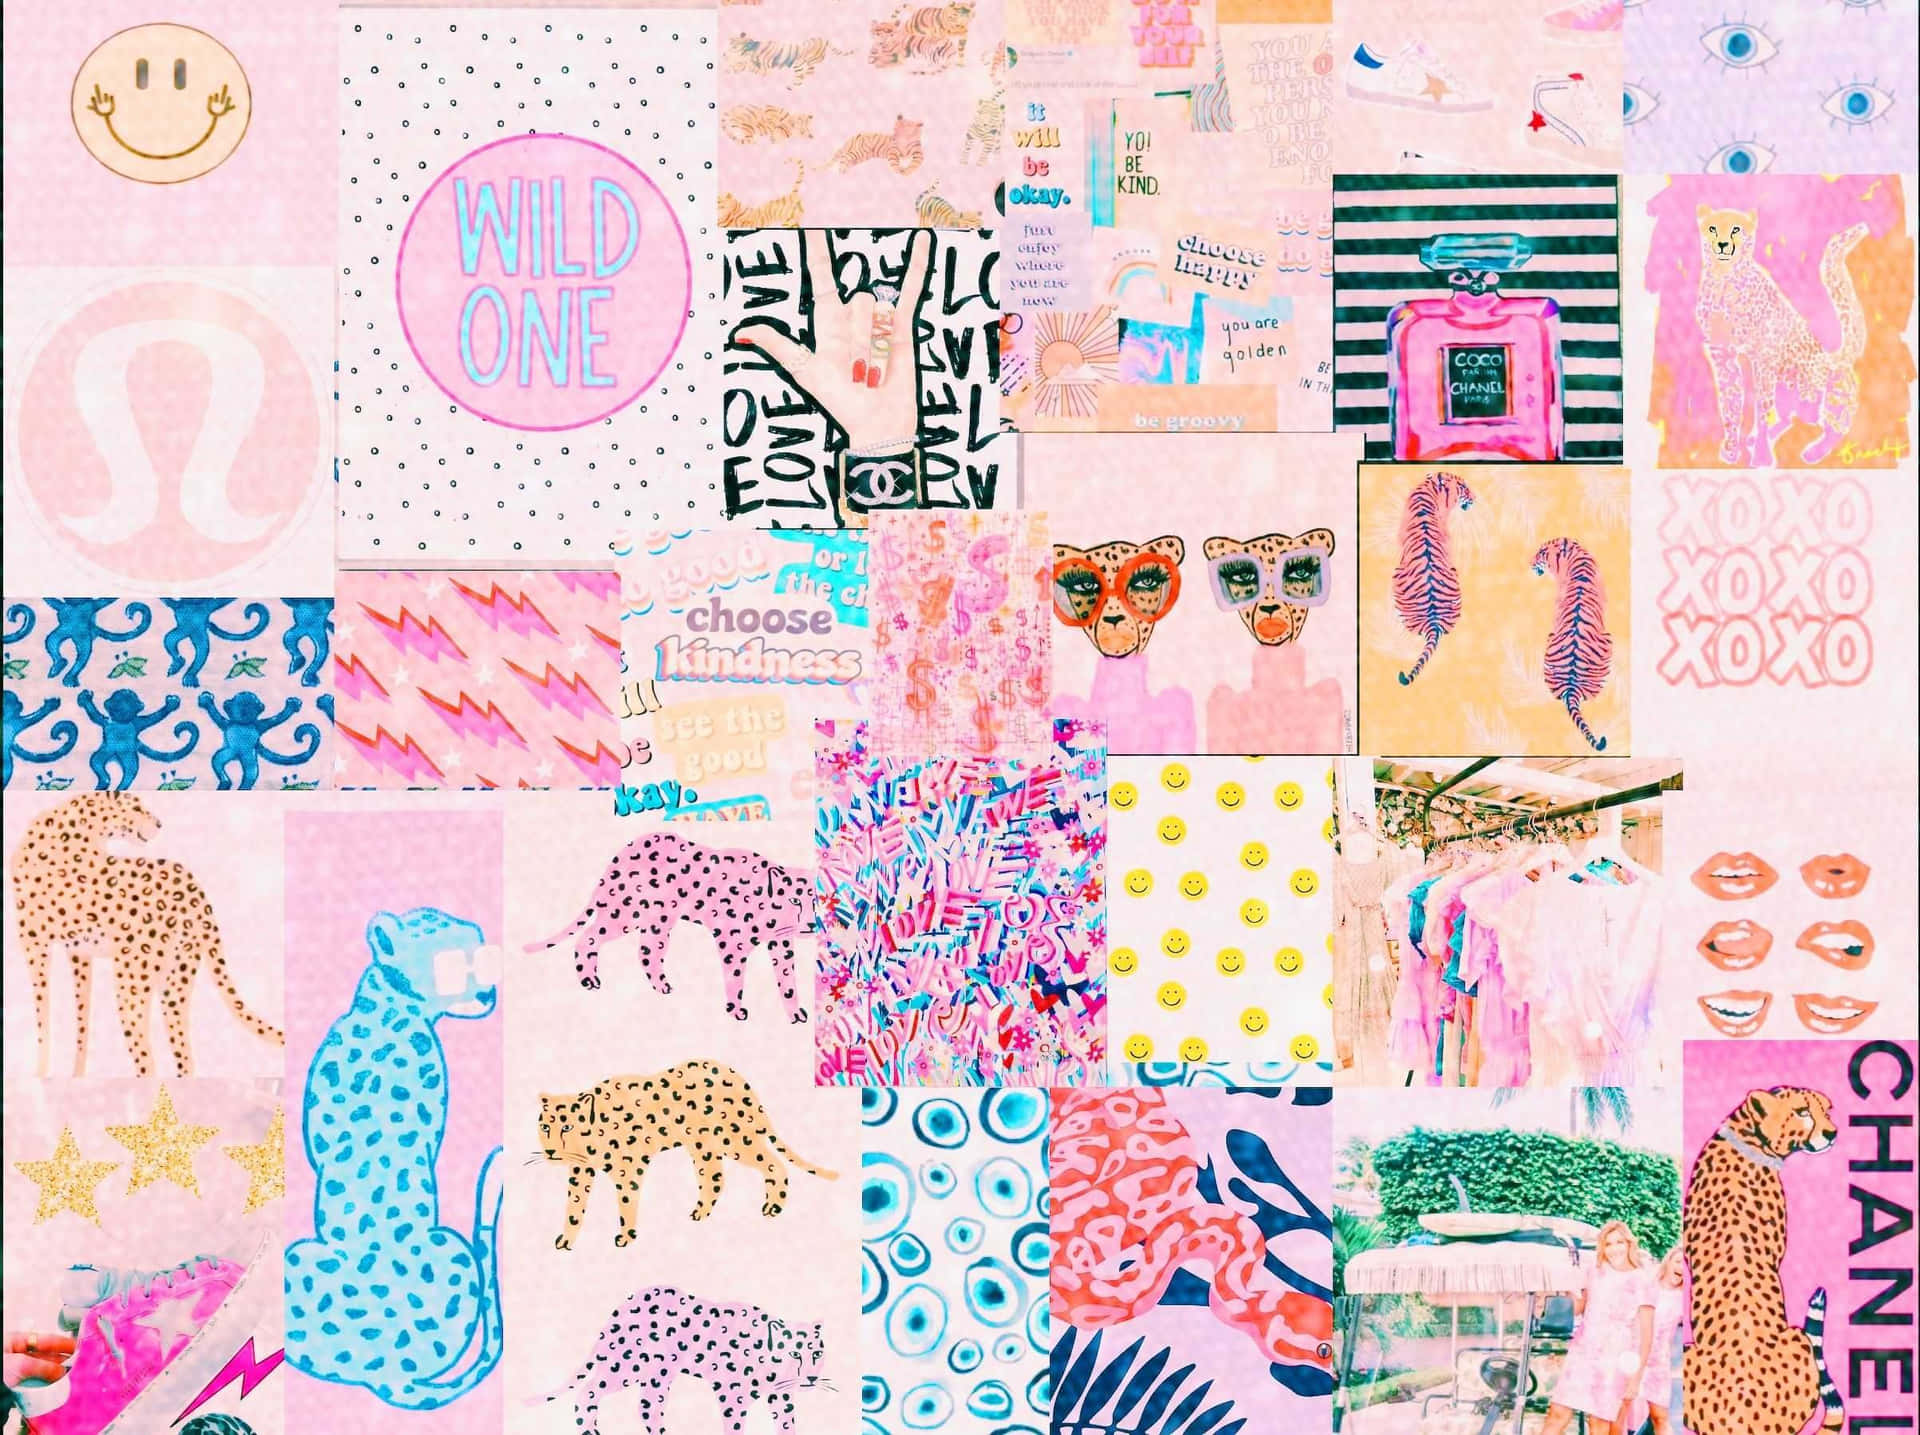 Stay Organized in Style With a Pink iPad Wallpaper